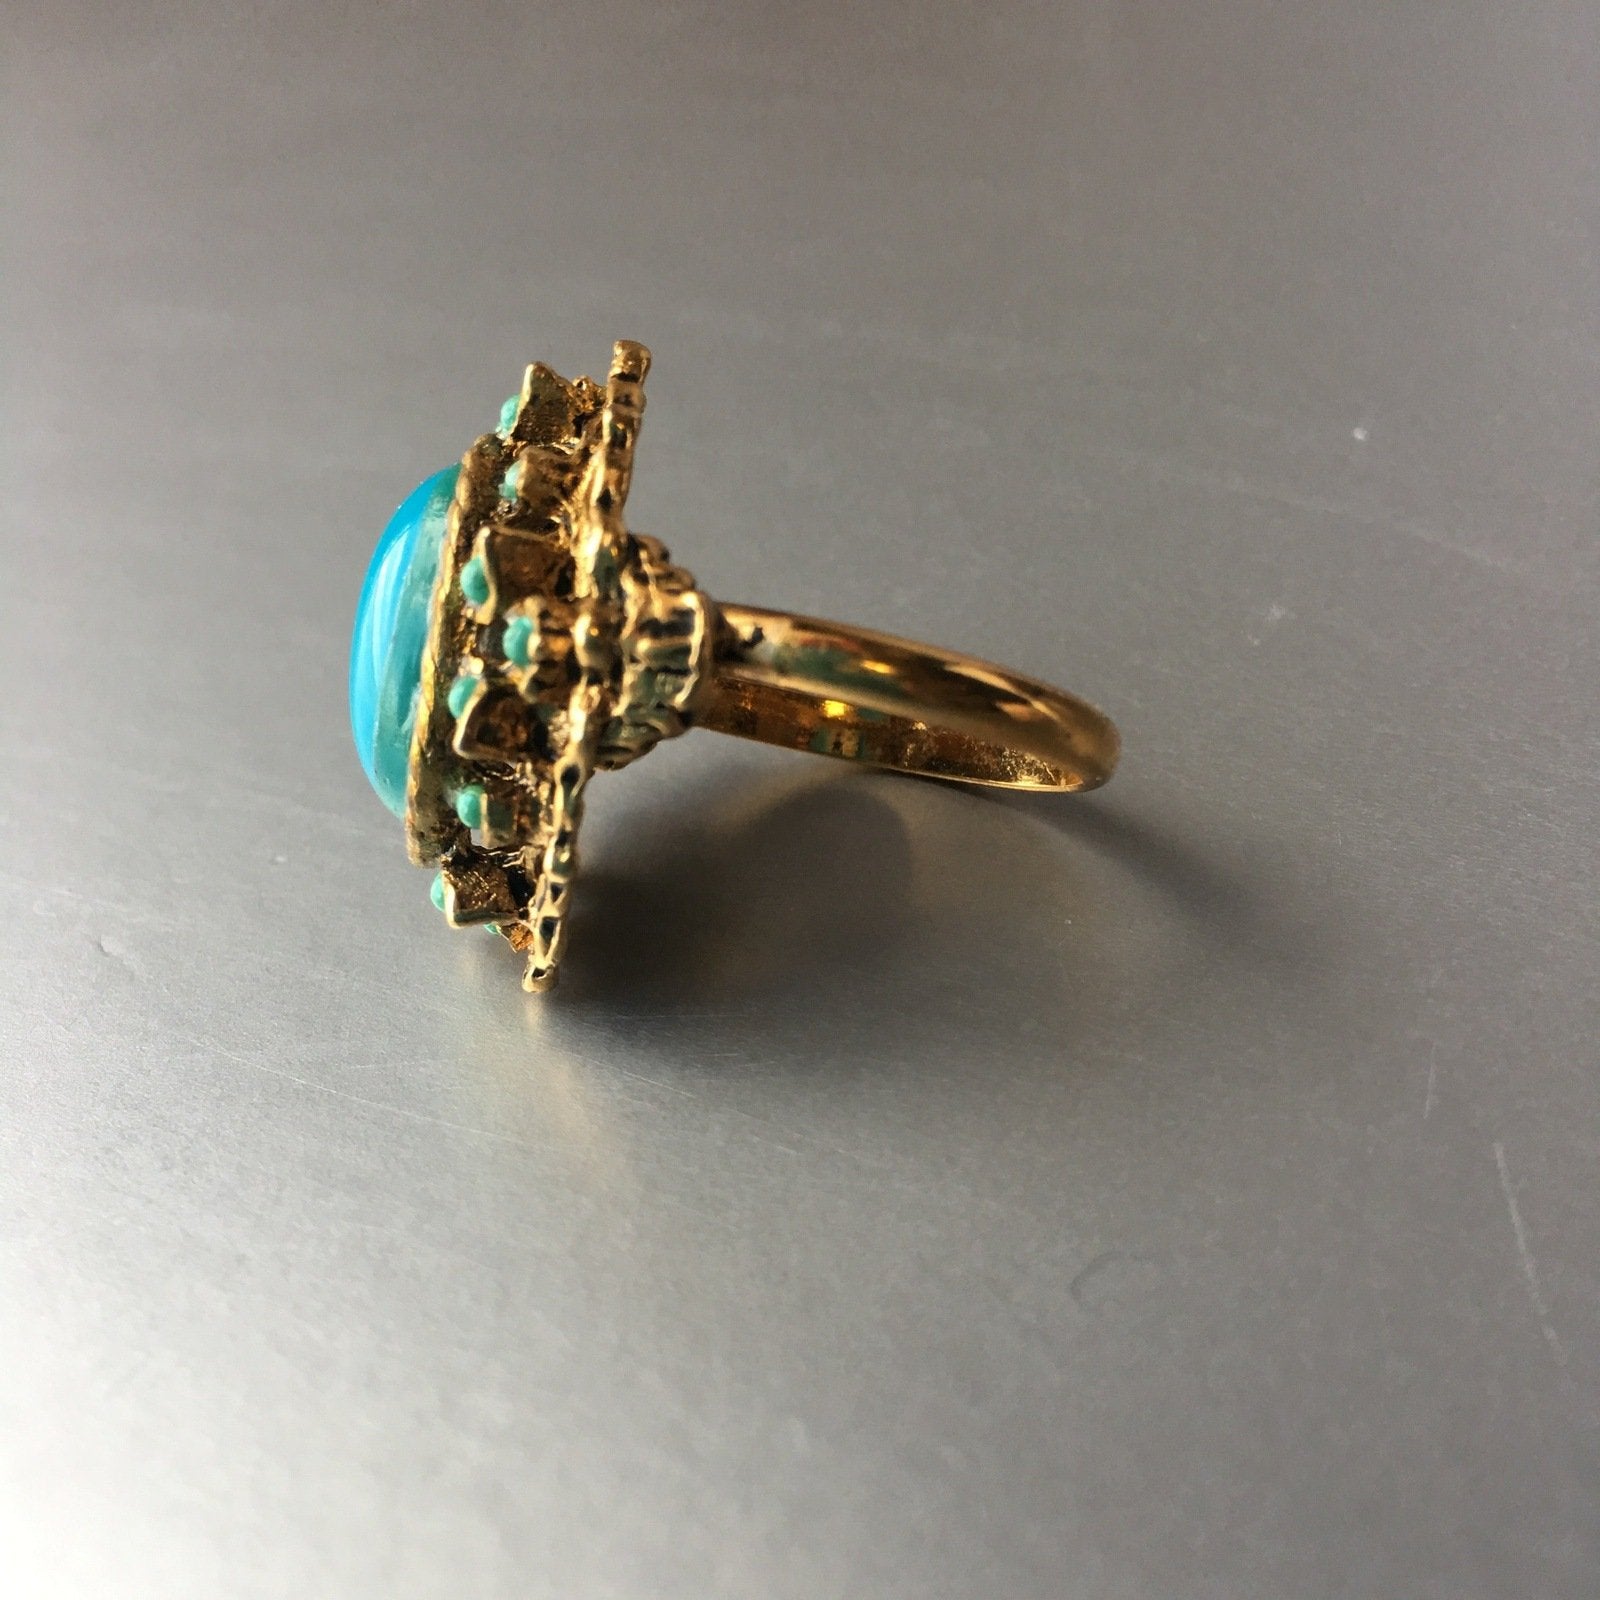 Vintage Turquoise Victorian Ring